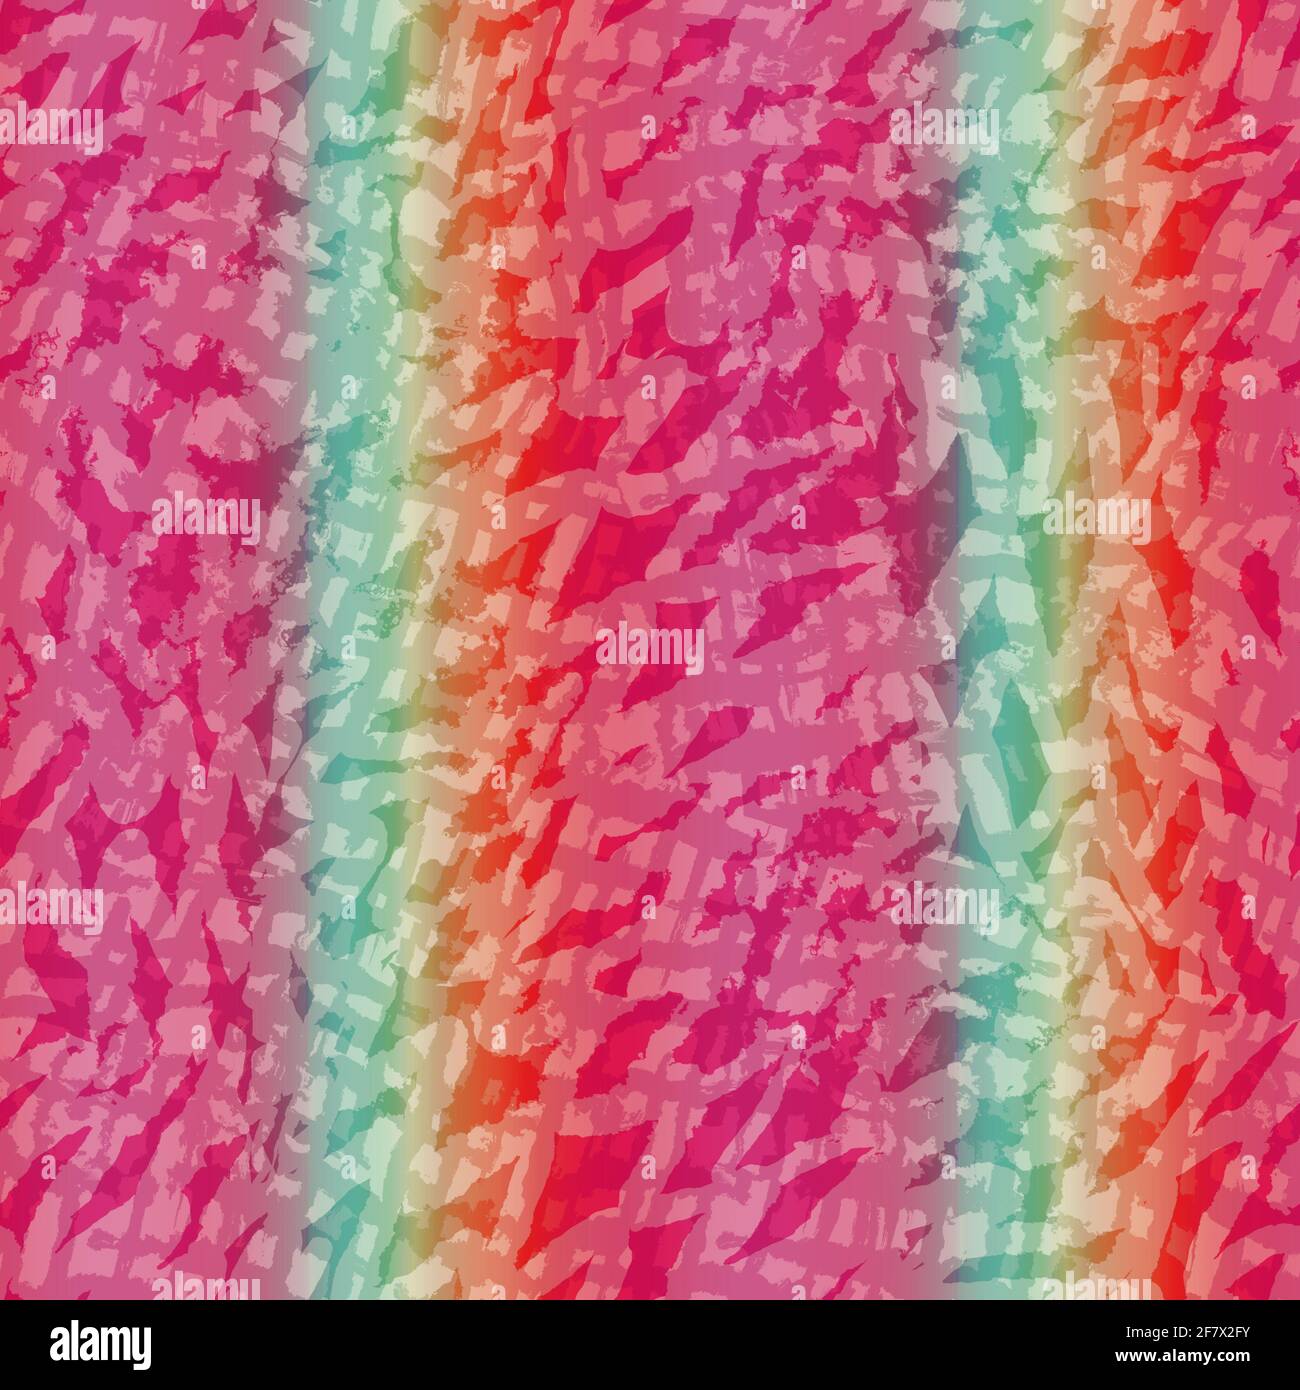 Horizontal blurry ombre blend textured stripe background